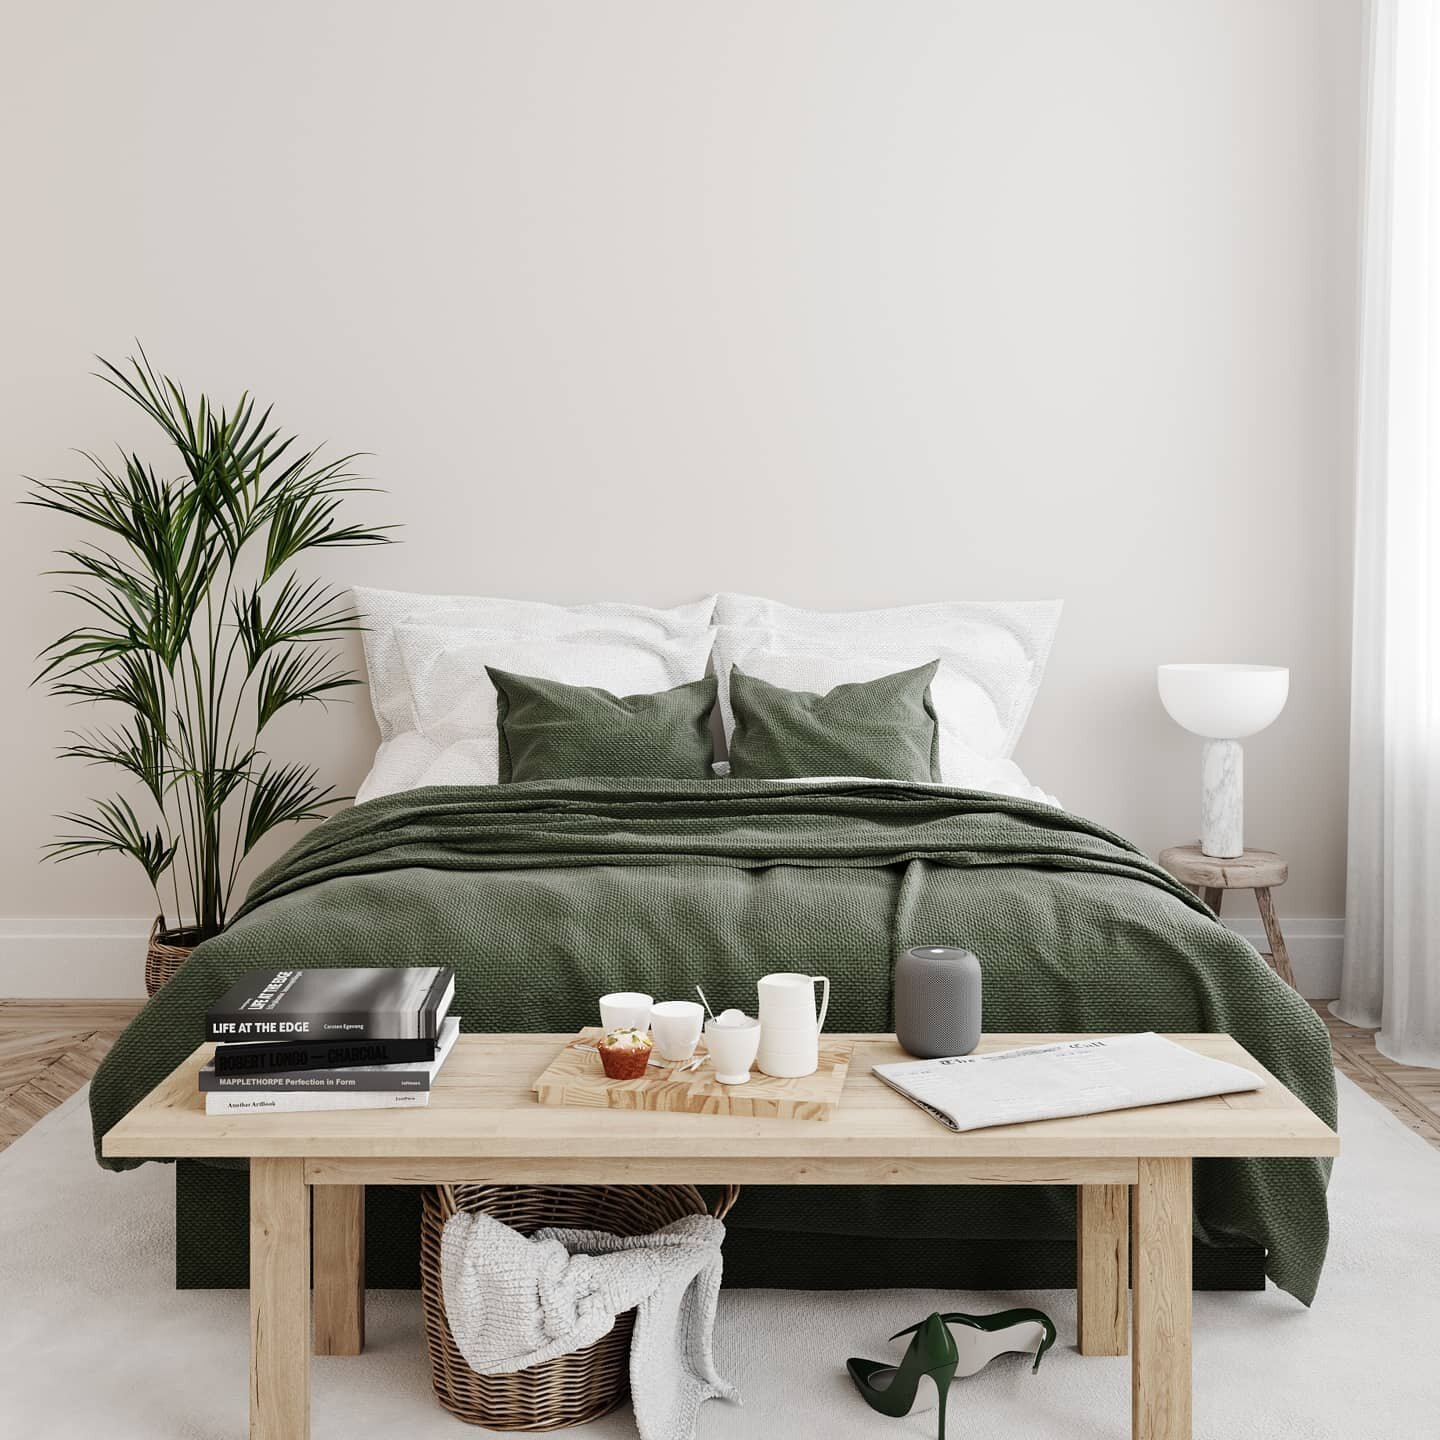 Virtual Staging 3D Visualisation. Creating static backdrops &amp; environments for product marketing. Here the client wanted a slightly different composition to the reference image, making the bed a central feature of the scene. 

Image 1 - 3D Render